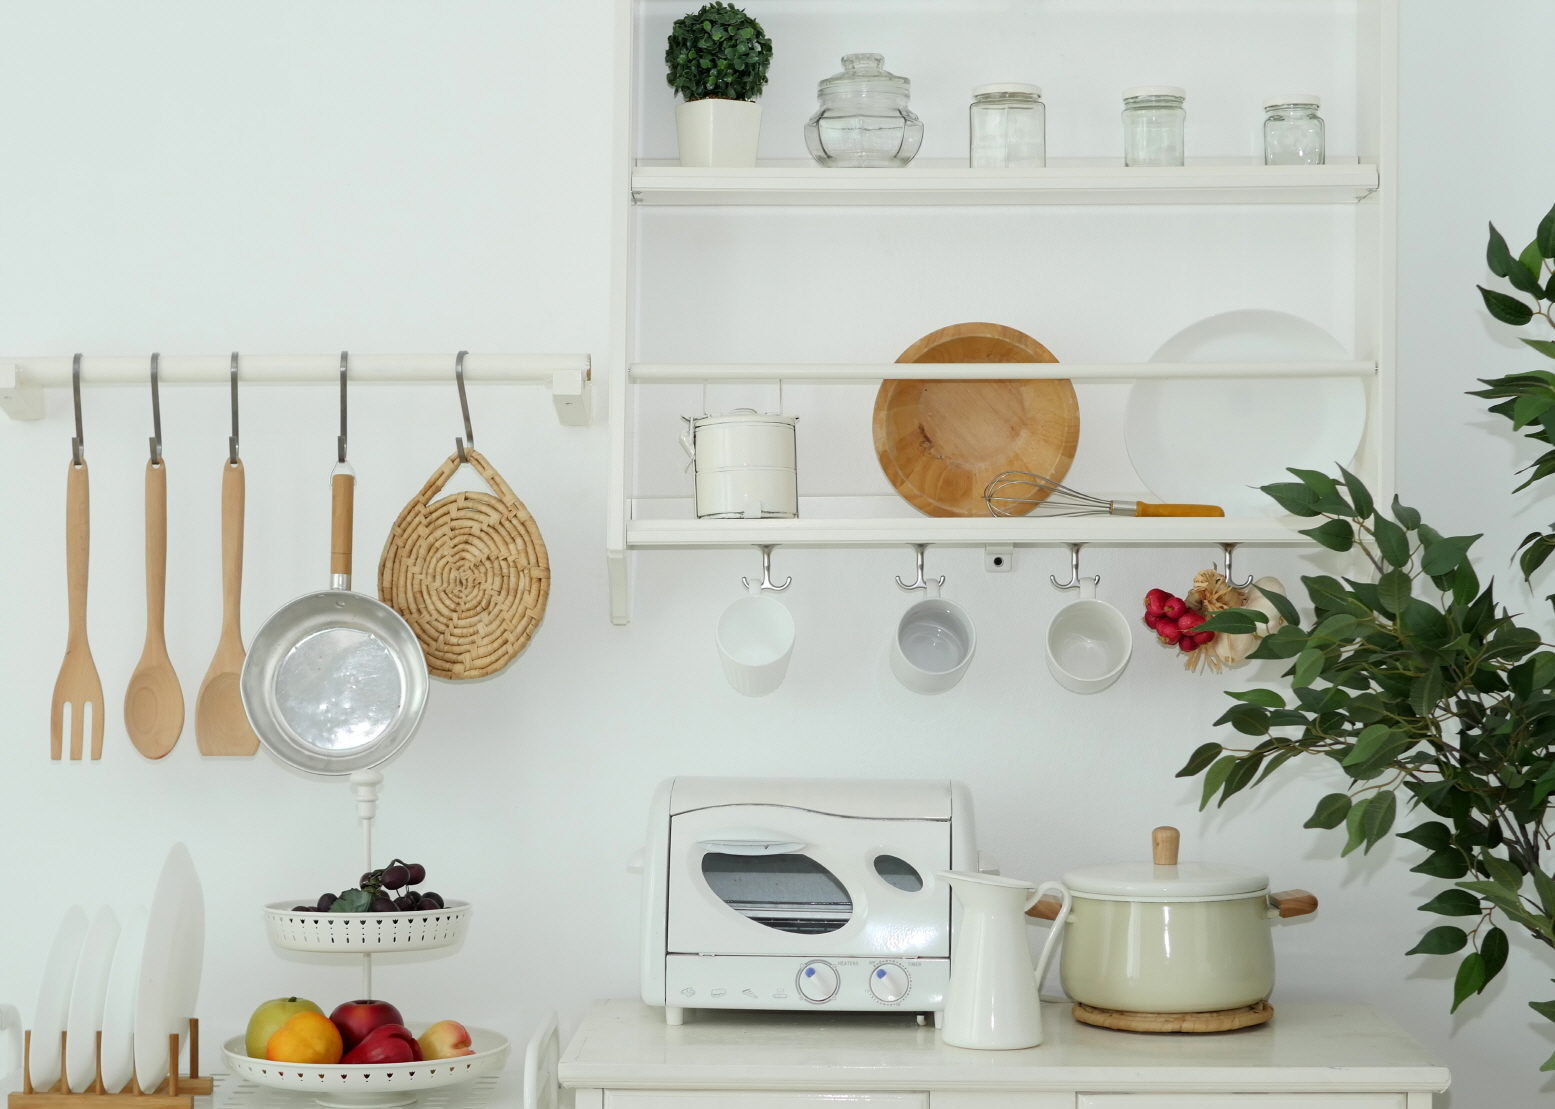 Turn kitchen tools into art with hooks, pegboards, or magnetic strips.